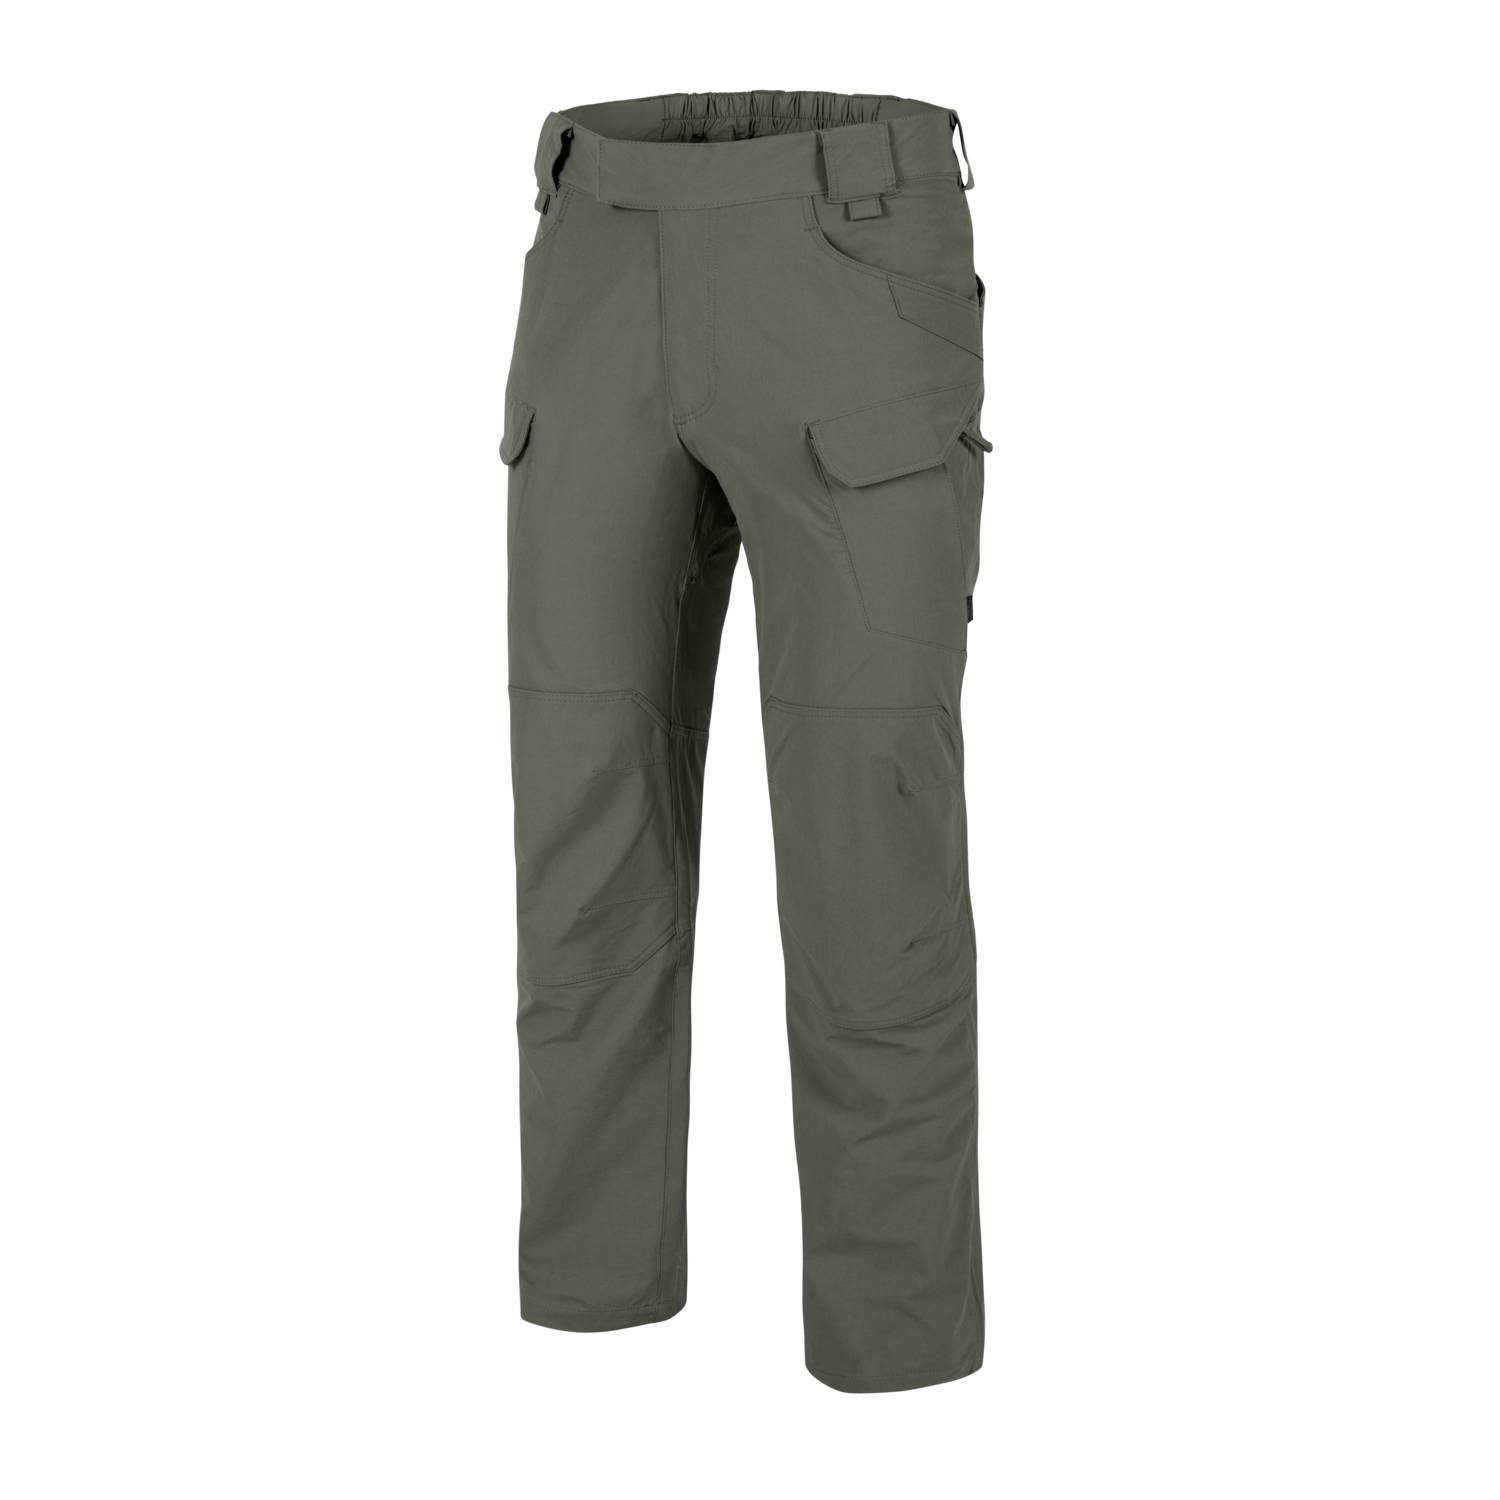 Kalhoty OUTDOOR TACTICAL LITE® TAIGA GREEN Velikost: L-XL